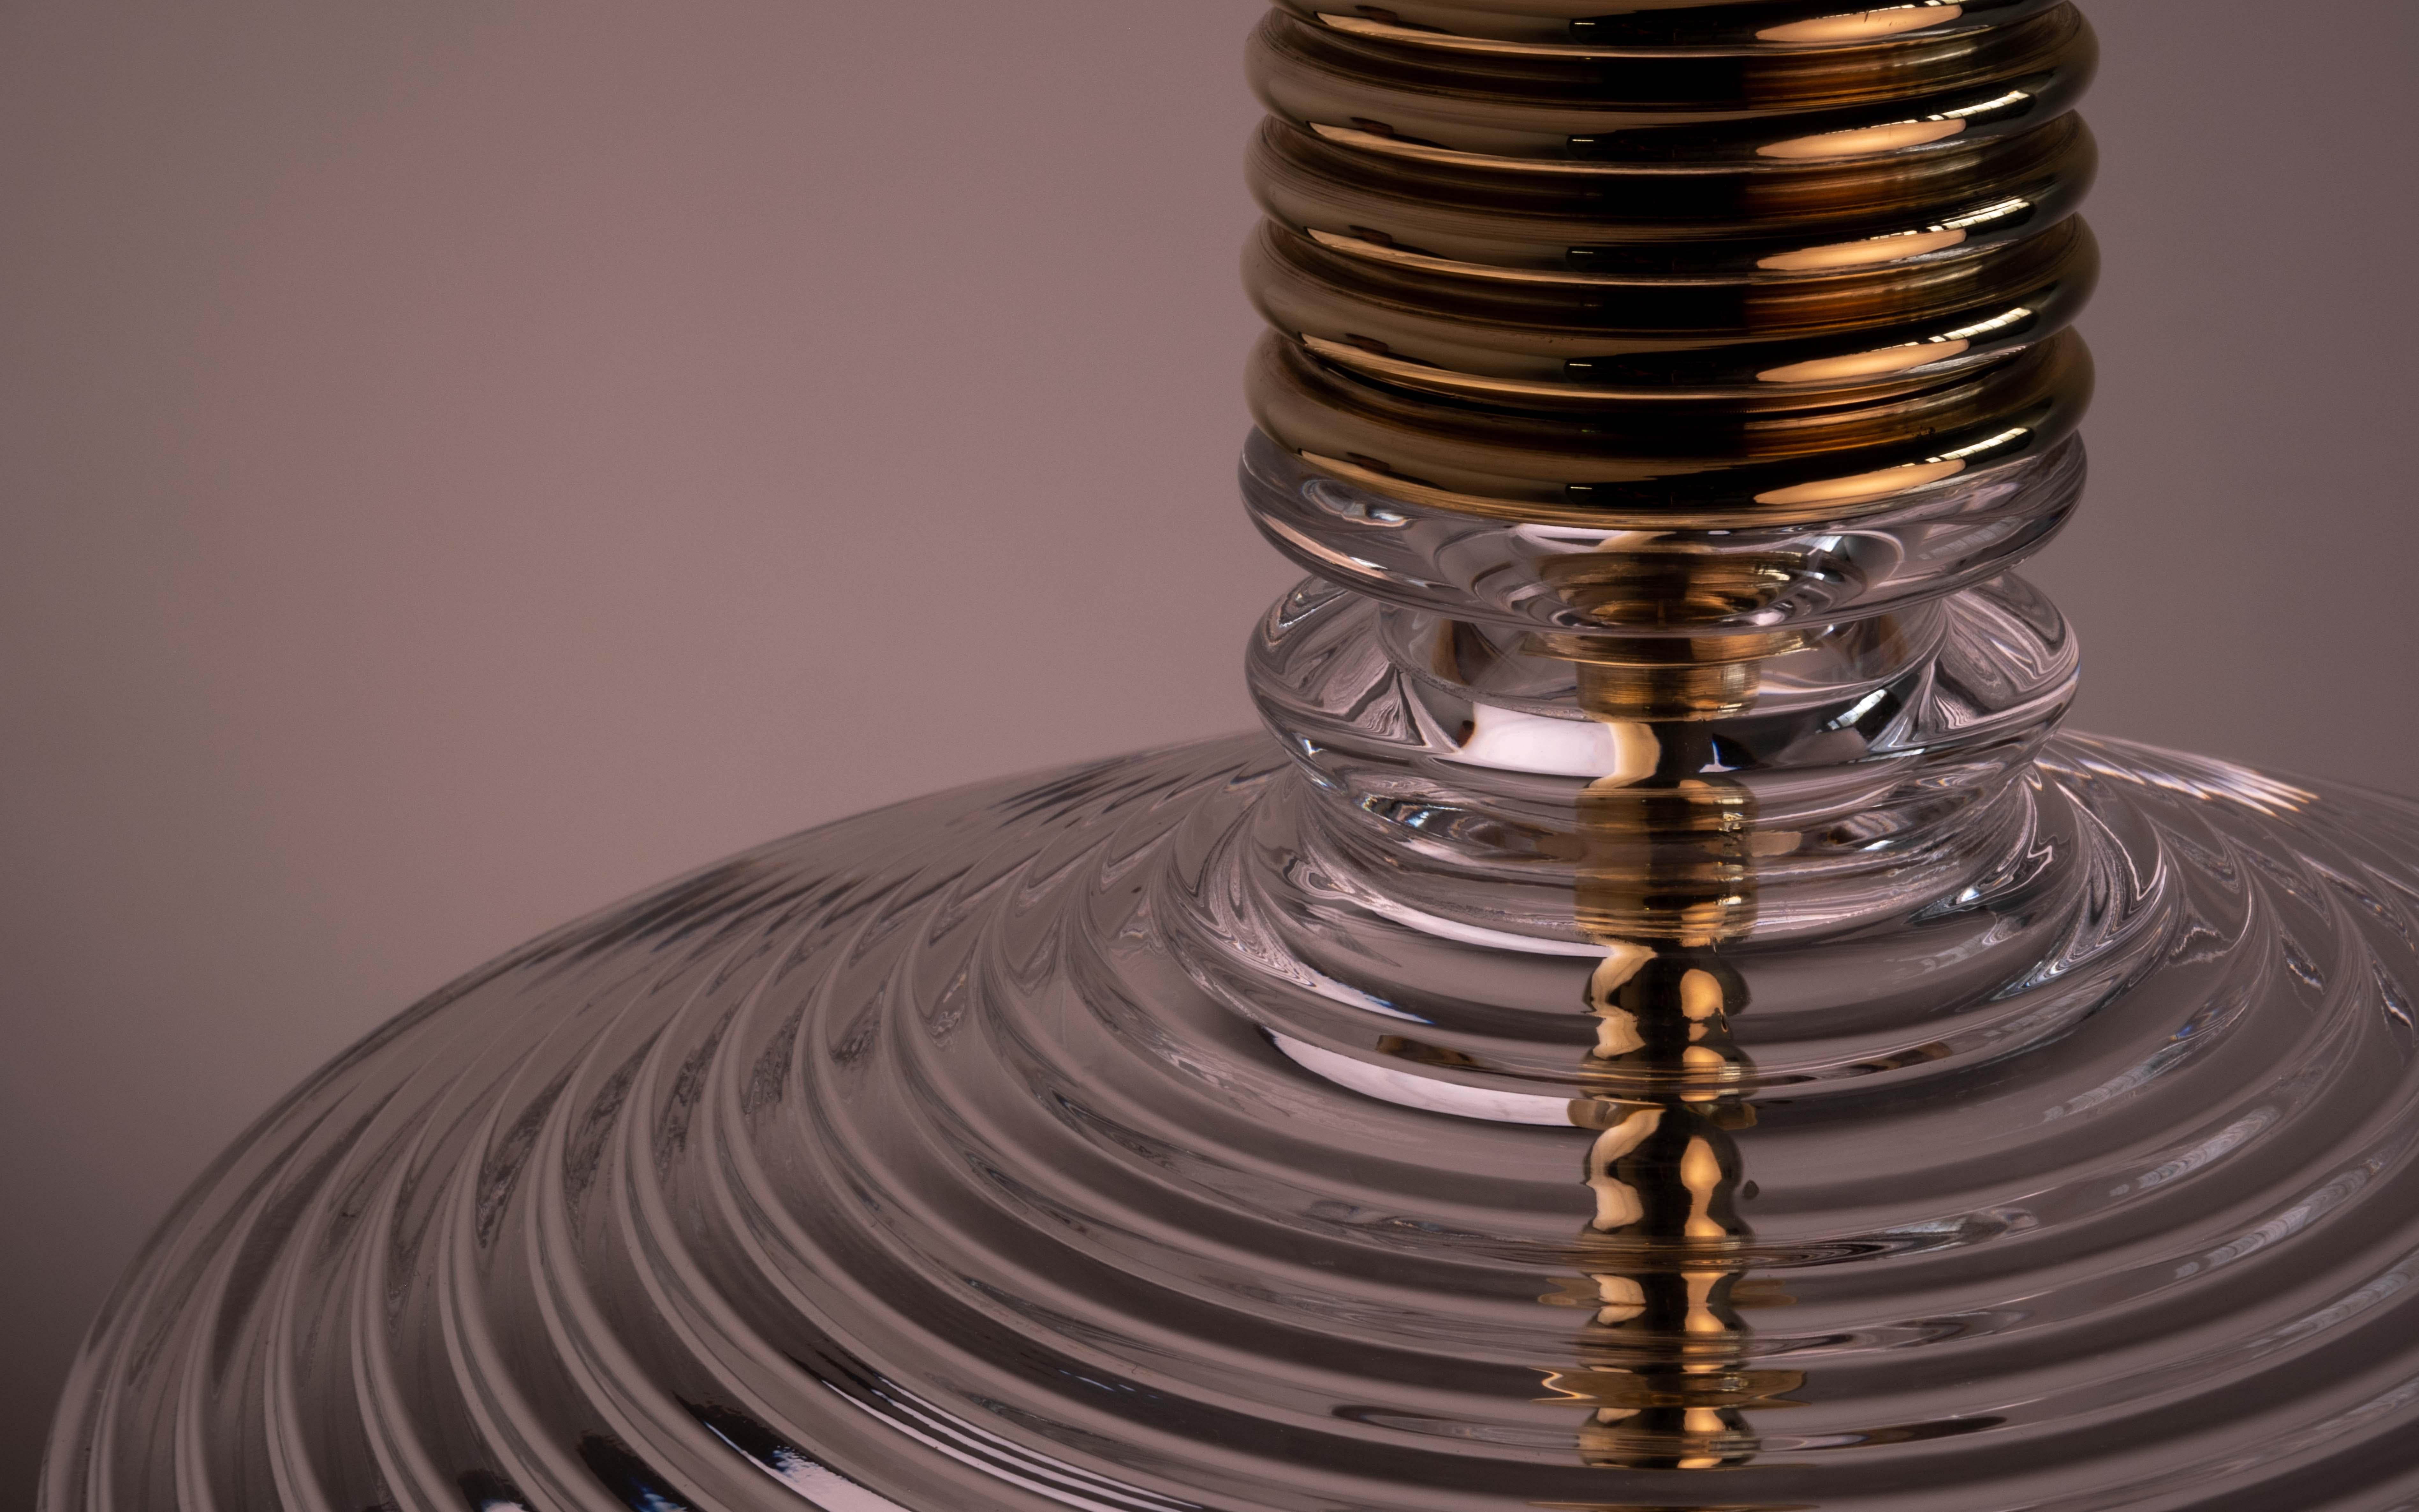 The Insulator 'B' Pendant in polished brass and clear glass by NOVOCASTRIAN deco For Sale 3